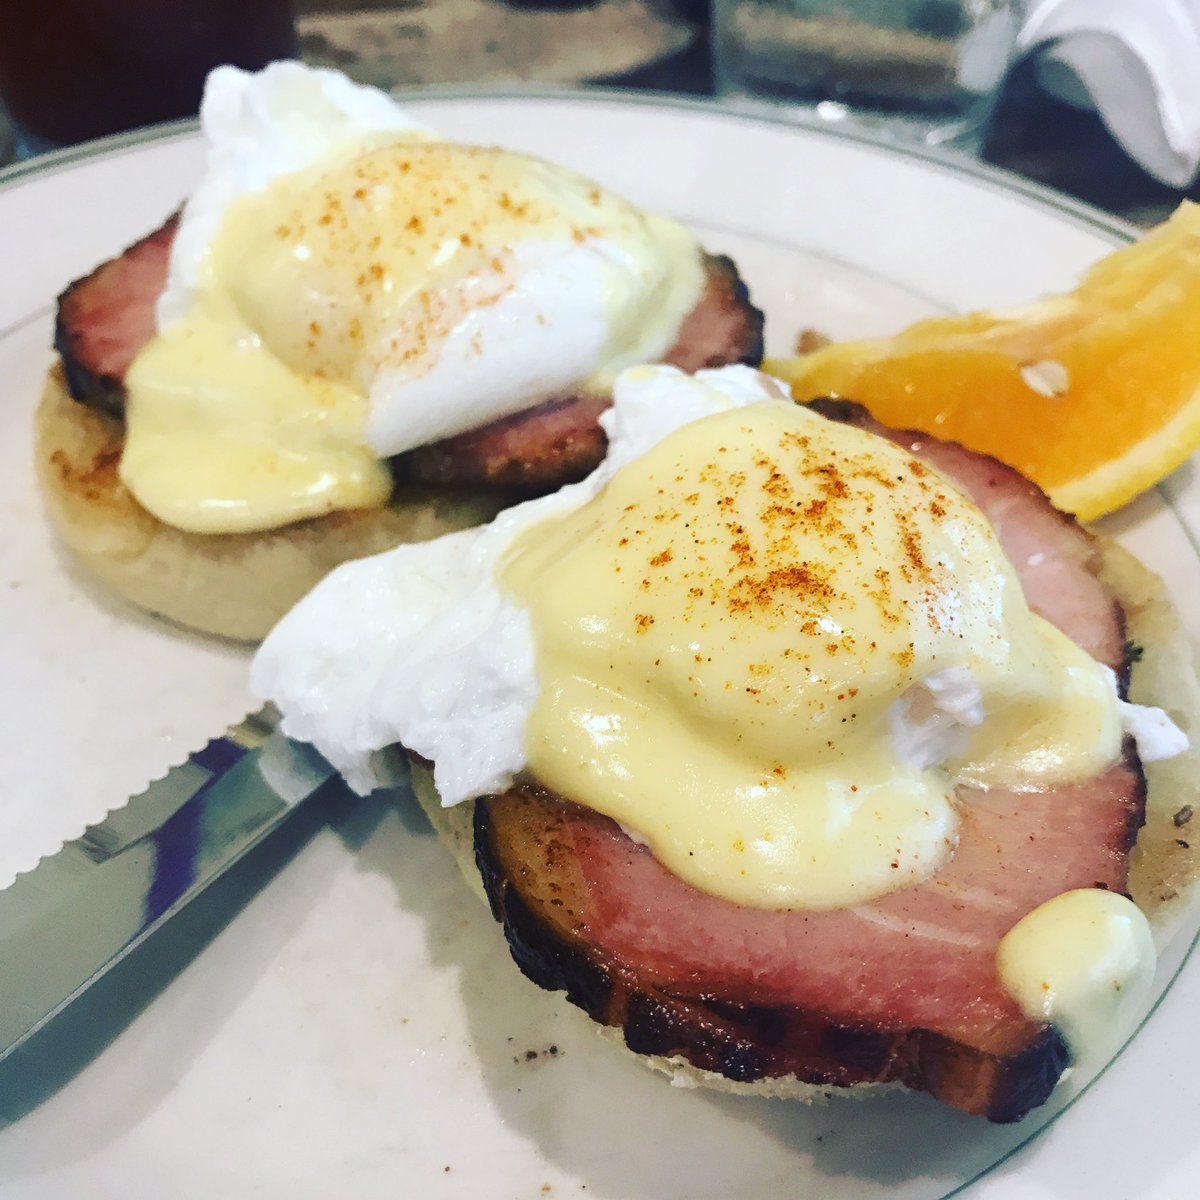 Cause who doesn’t like breakfast for dinner. Happy Eggs Benedict Day!

#MagnoliaPancakeHaus #EggsBenedict #Breakfast #Brunch